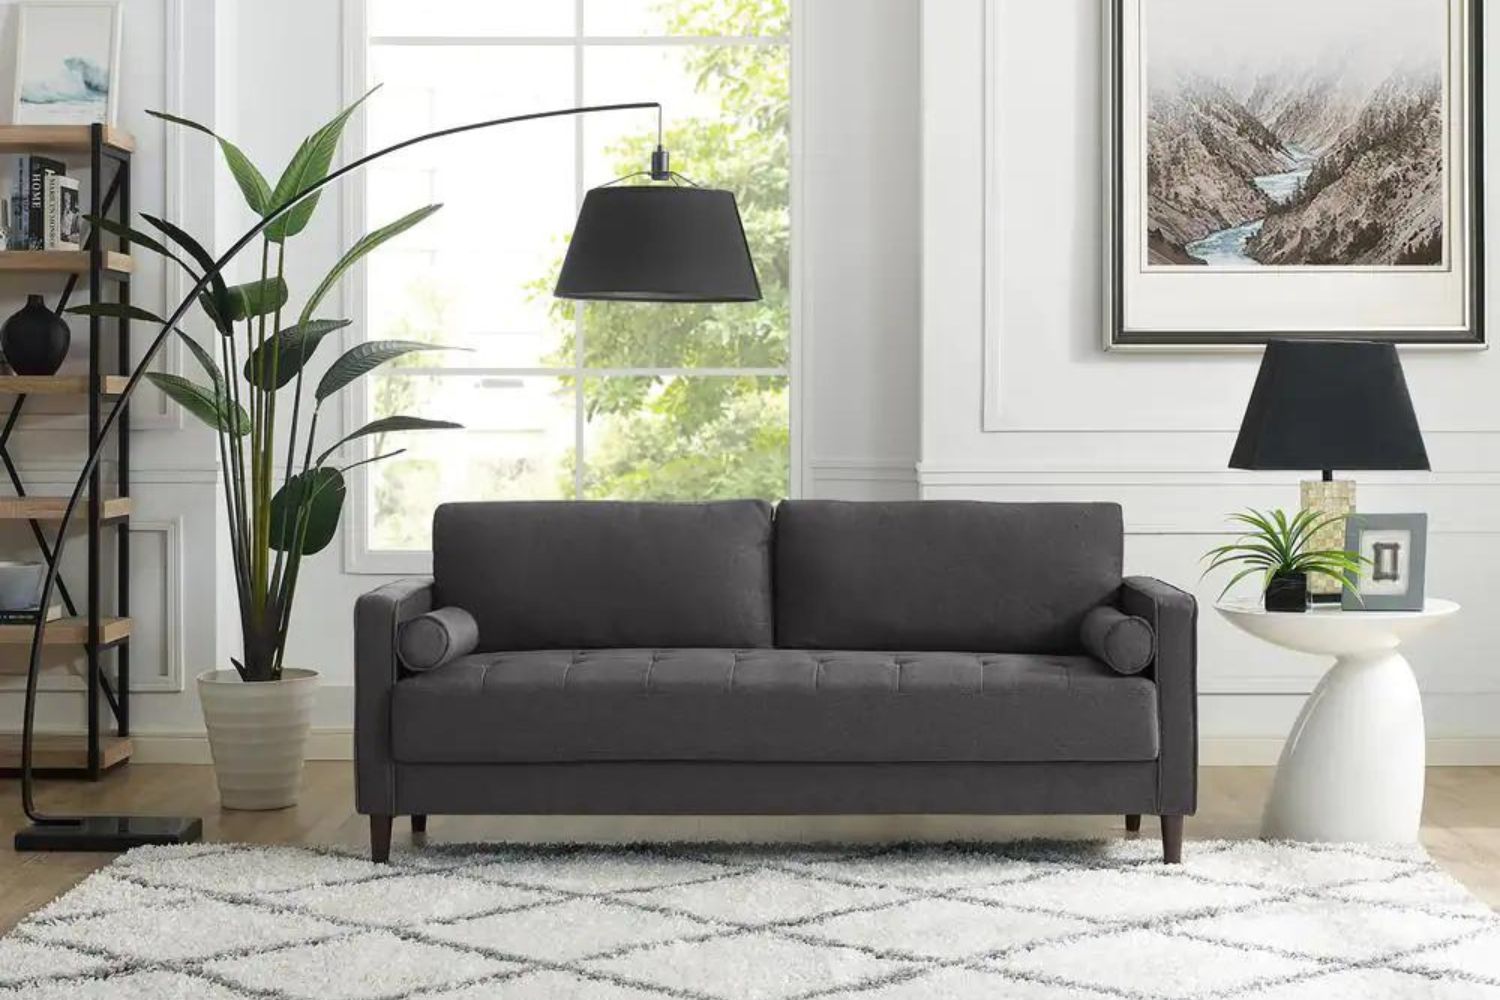 Sofas Under $500 Options: Lifestyle Solutions Lillith Heather Grey Polyester Tuxedo Sofa